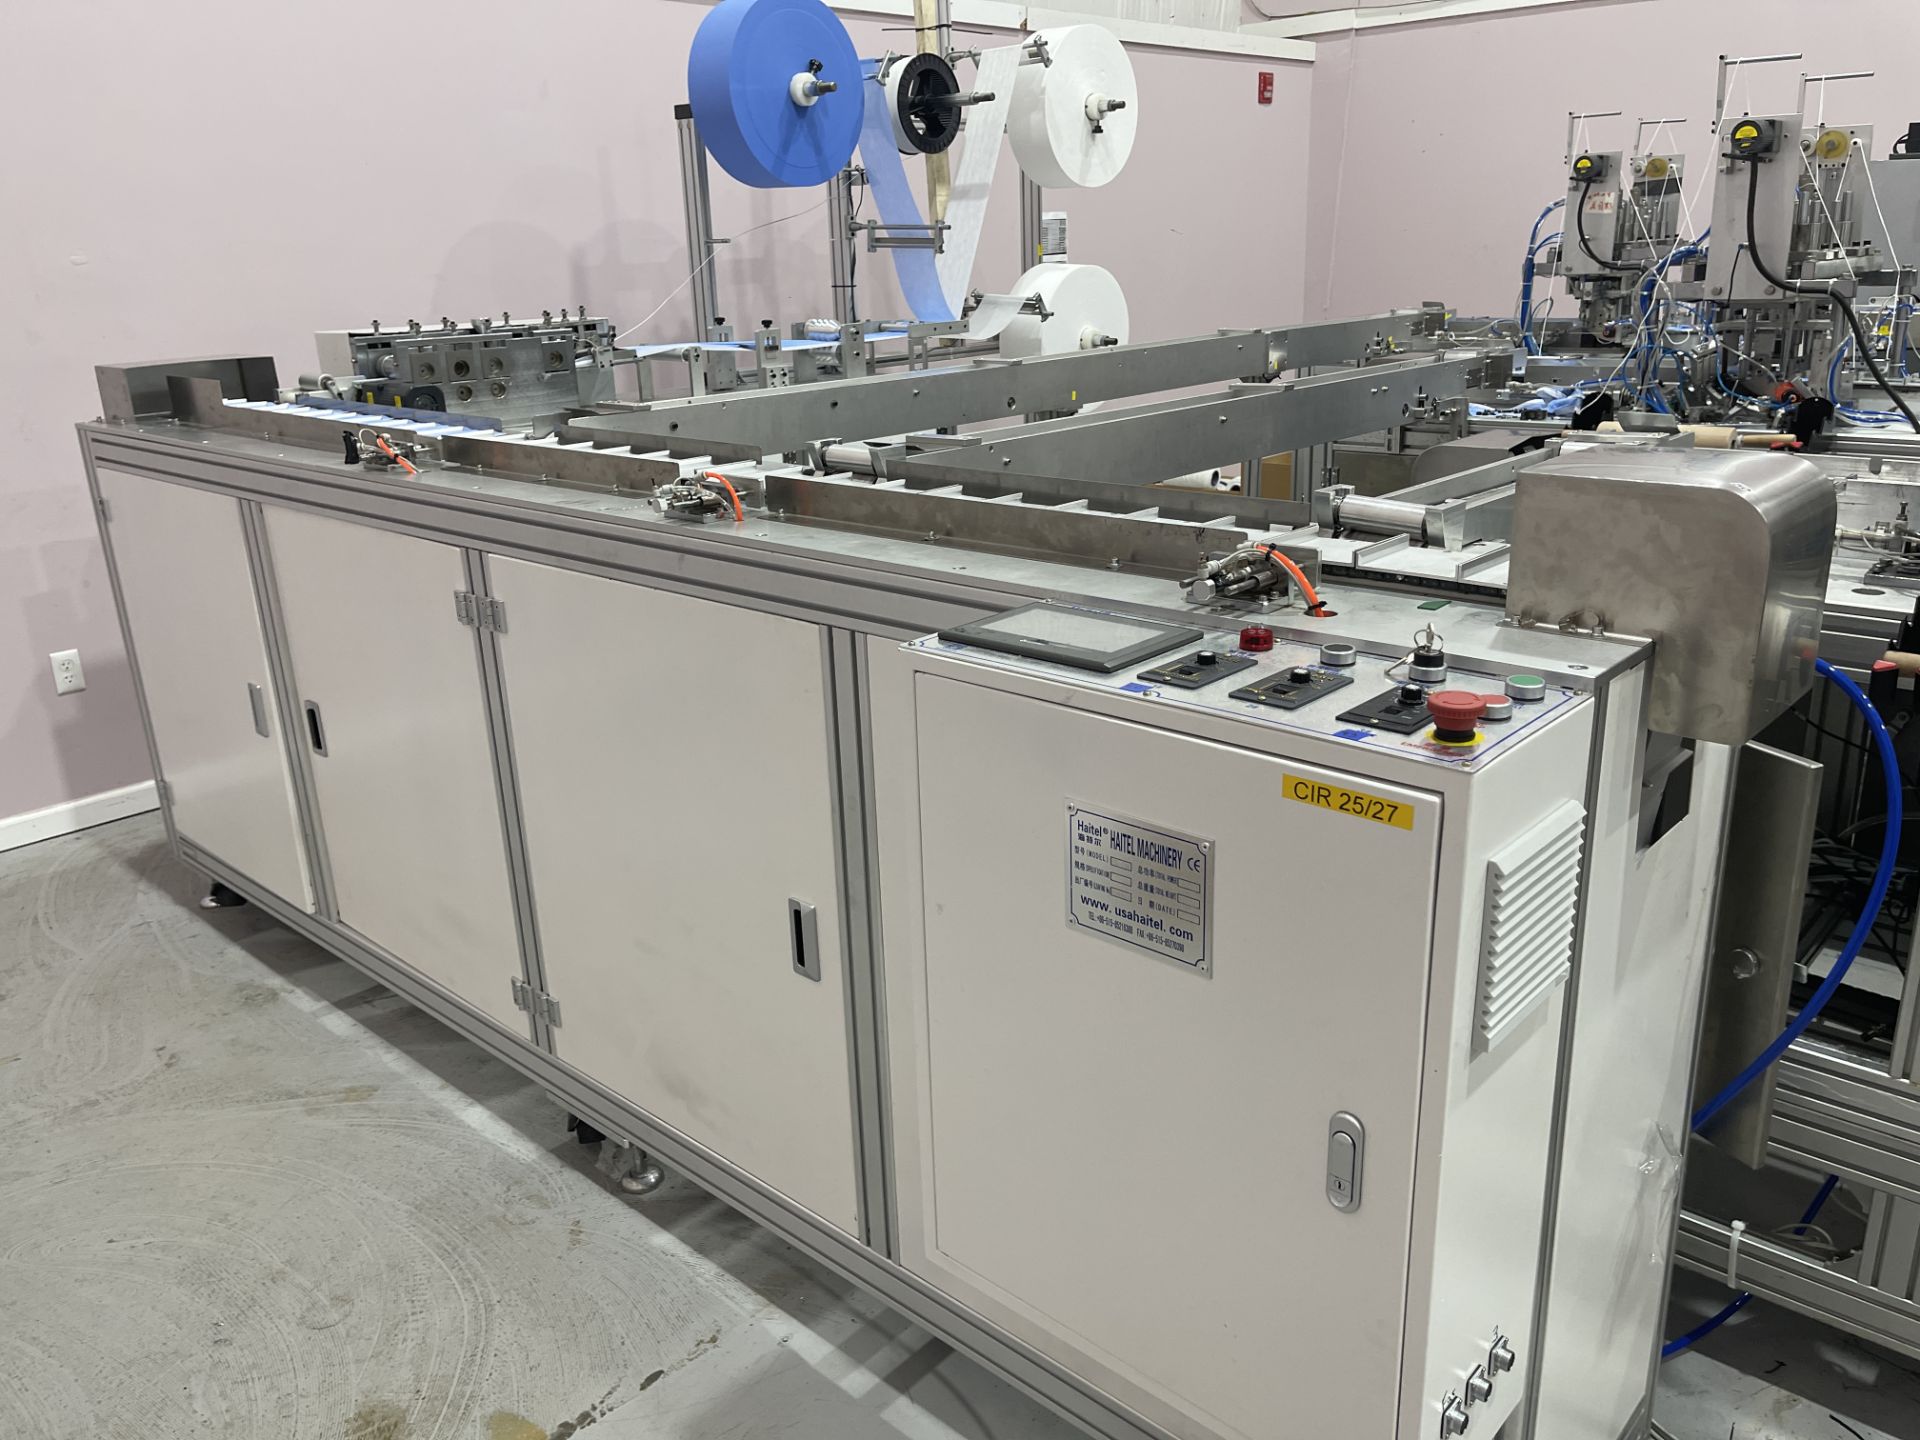 COMPLETE PACKAGE: 2020 3-Ply Disposable Medical Mask Assembly & Packaging Line Equipment, Includes: - Image 97 of 150